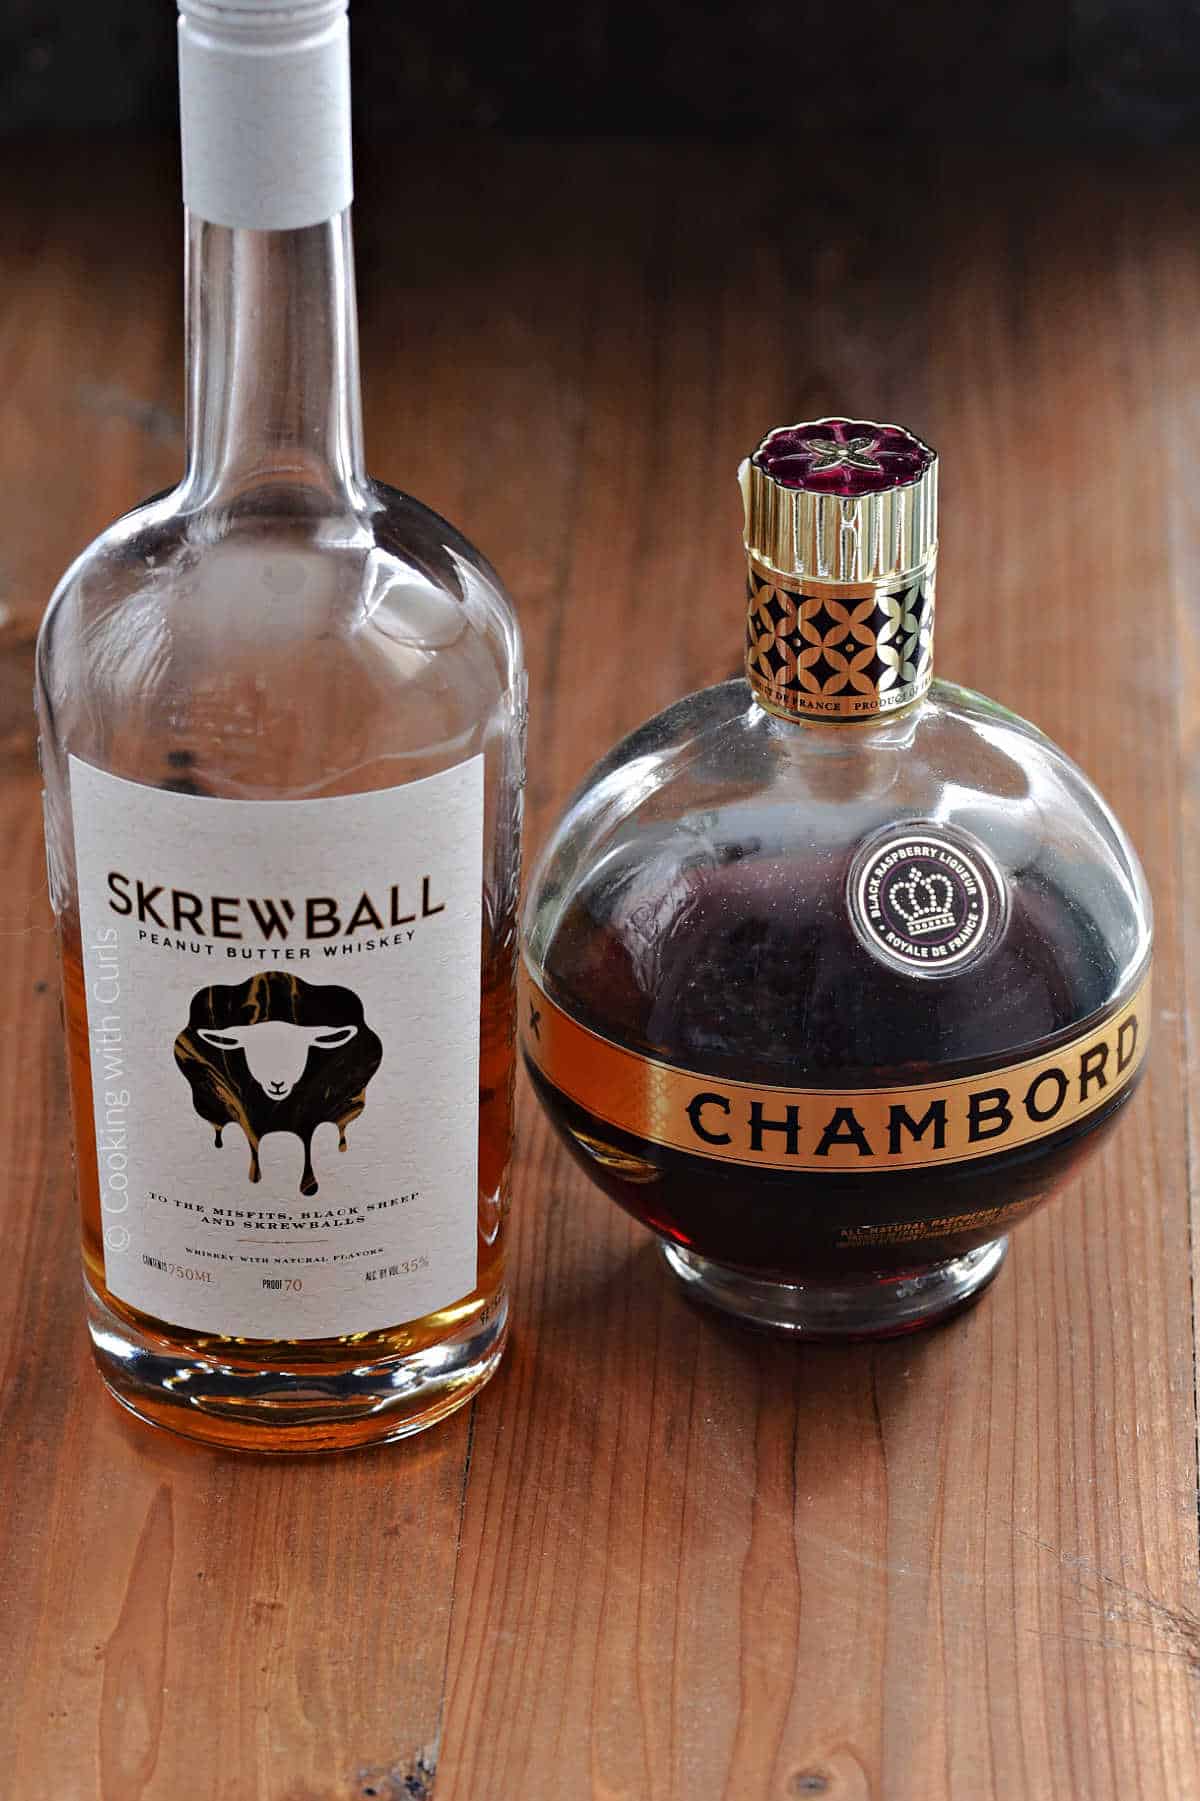 A bottle of Skrewball peanut butter whiskey and a bottle of chambord liqueur on a wooden board.